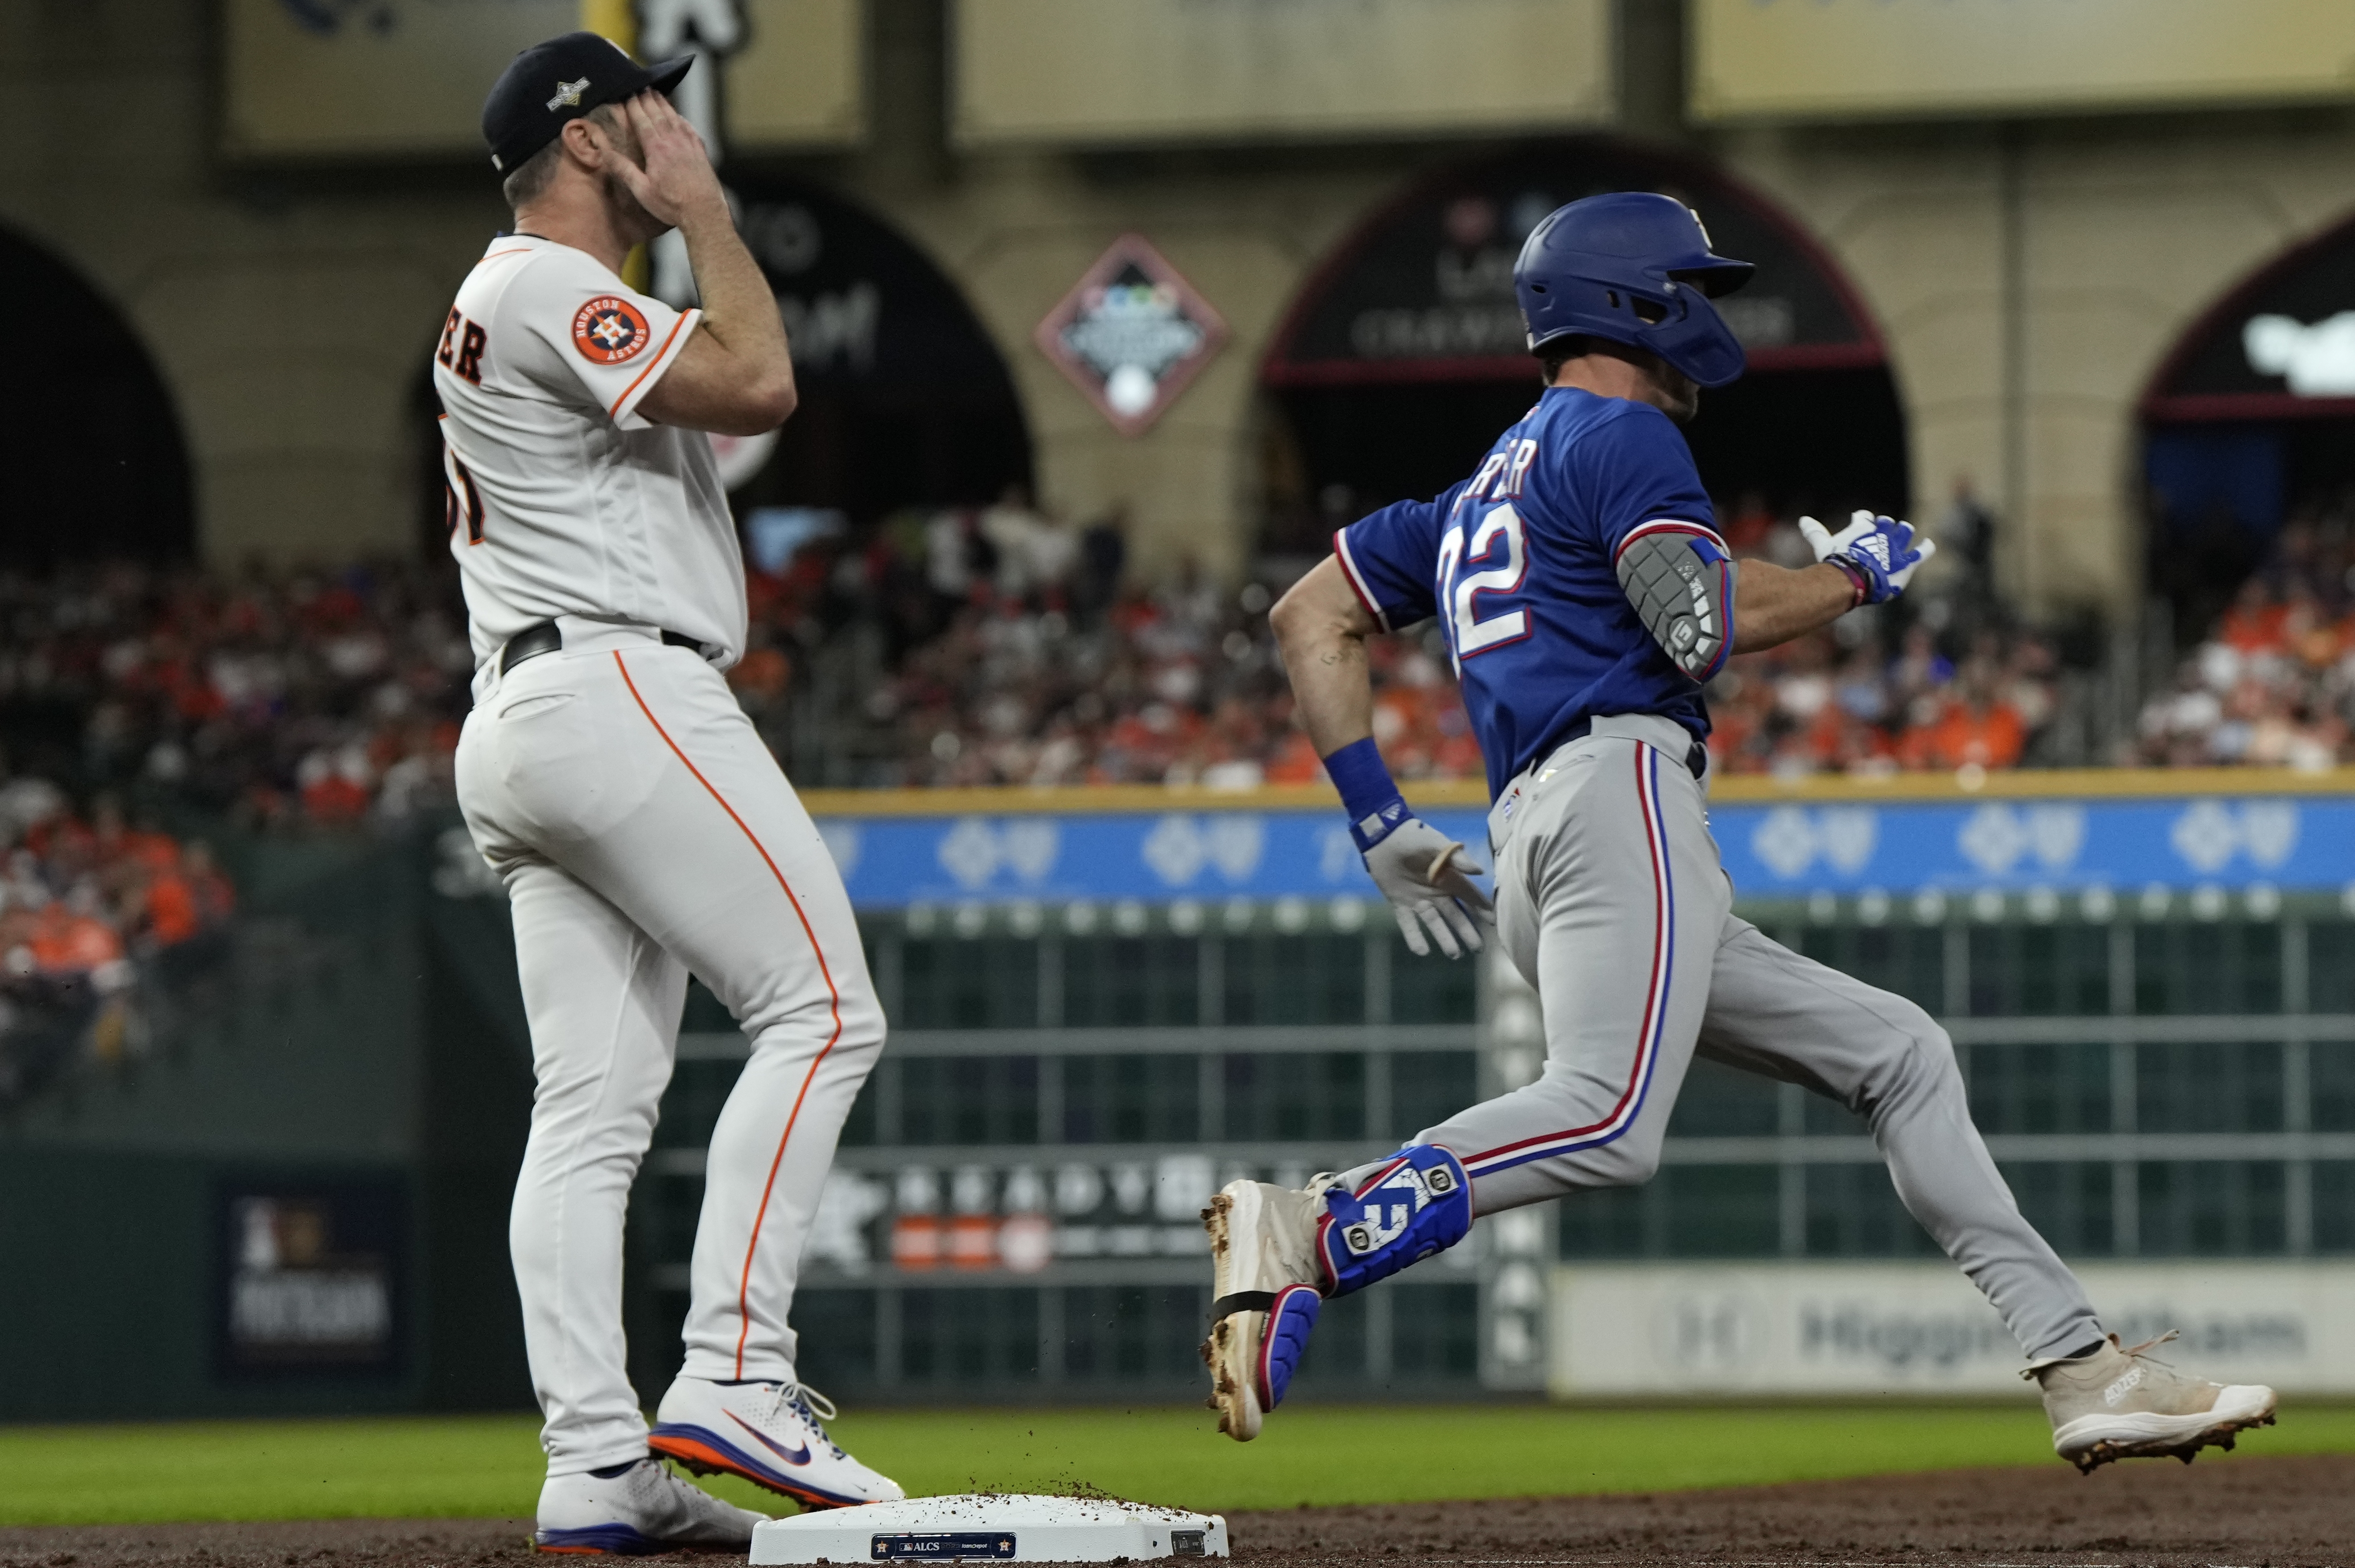 Astros' playoff hopes come down to the season's final week